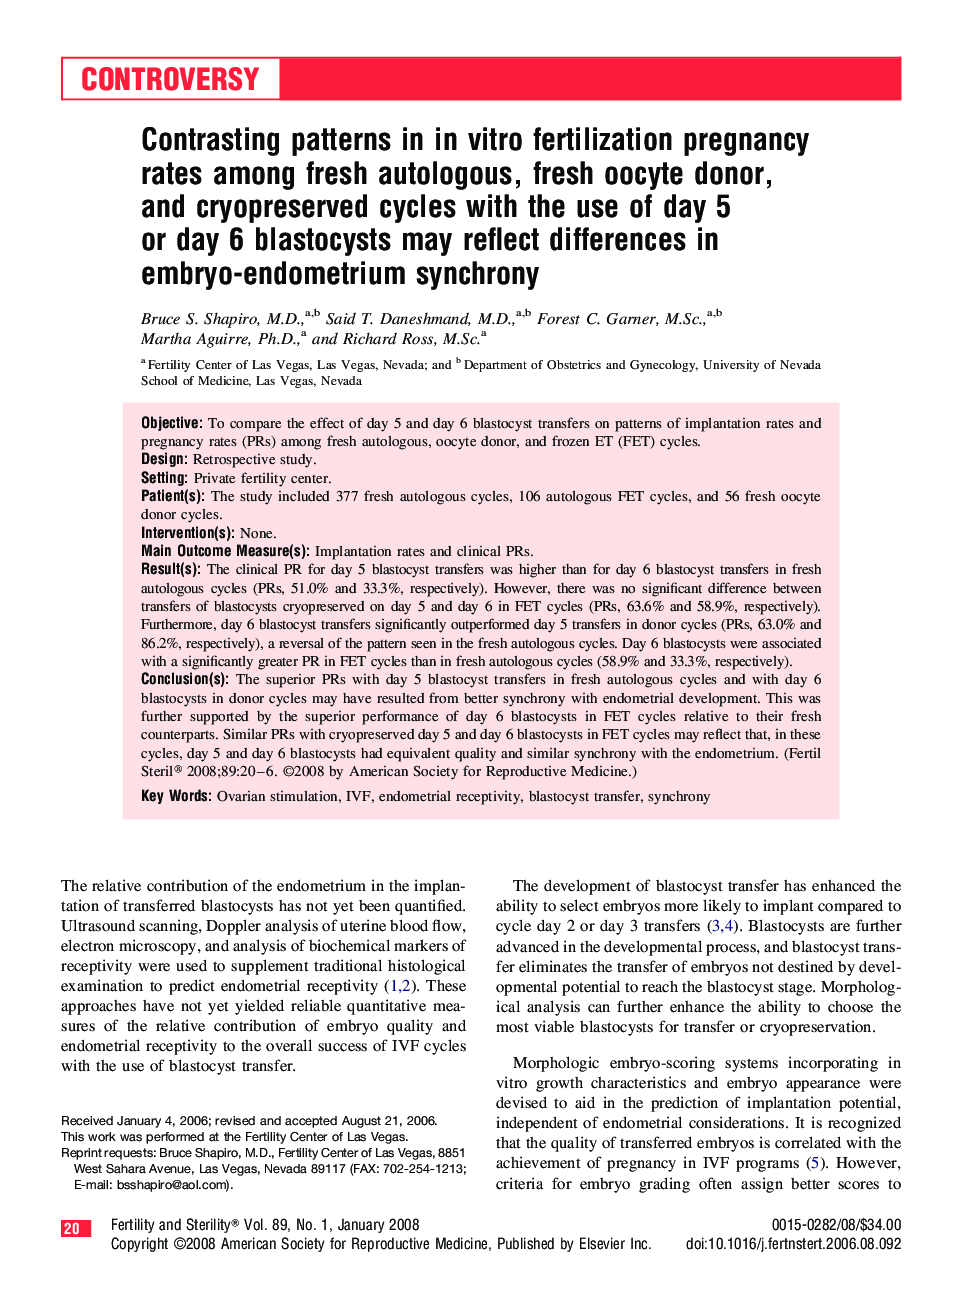 Contrasting patterns in in vitro fertilization pregnancy rates among fresh autologous, fresh oocyte donor, and cryopreserved cycles with the use of day 5 or day 6 blastocysts may reflect differences in embryo-endometrium synchrony 